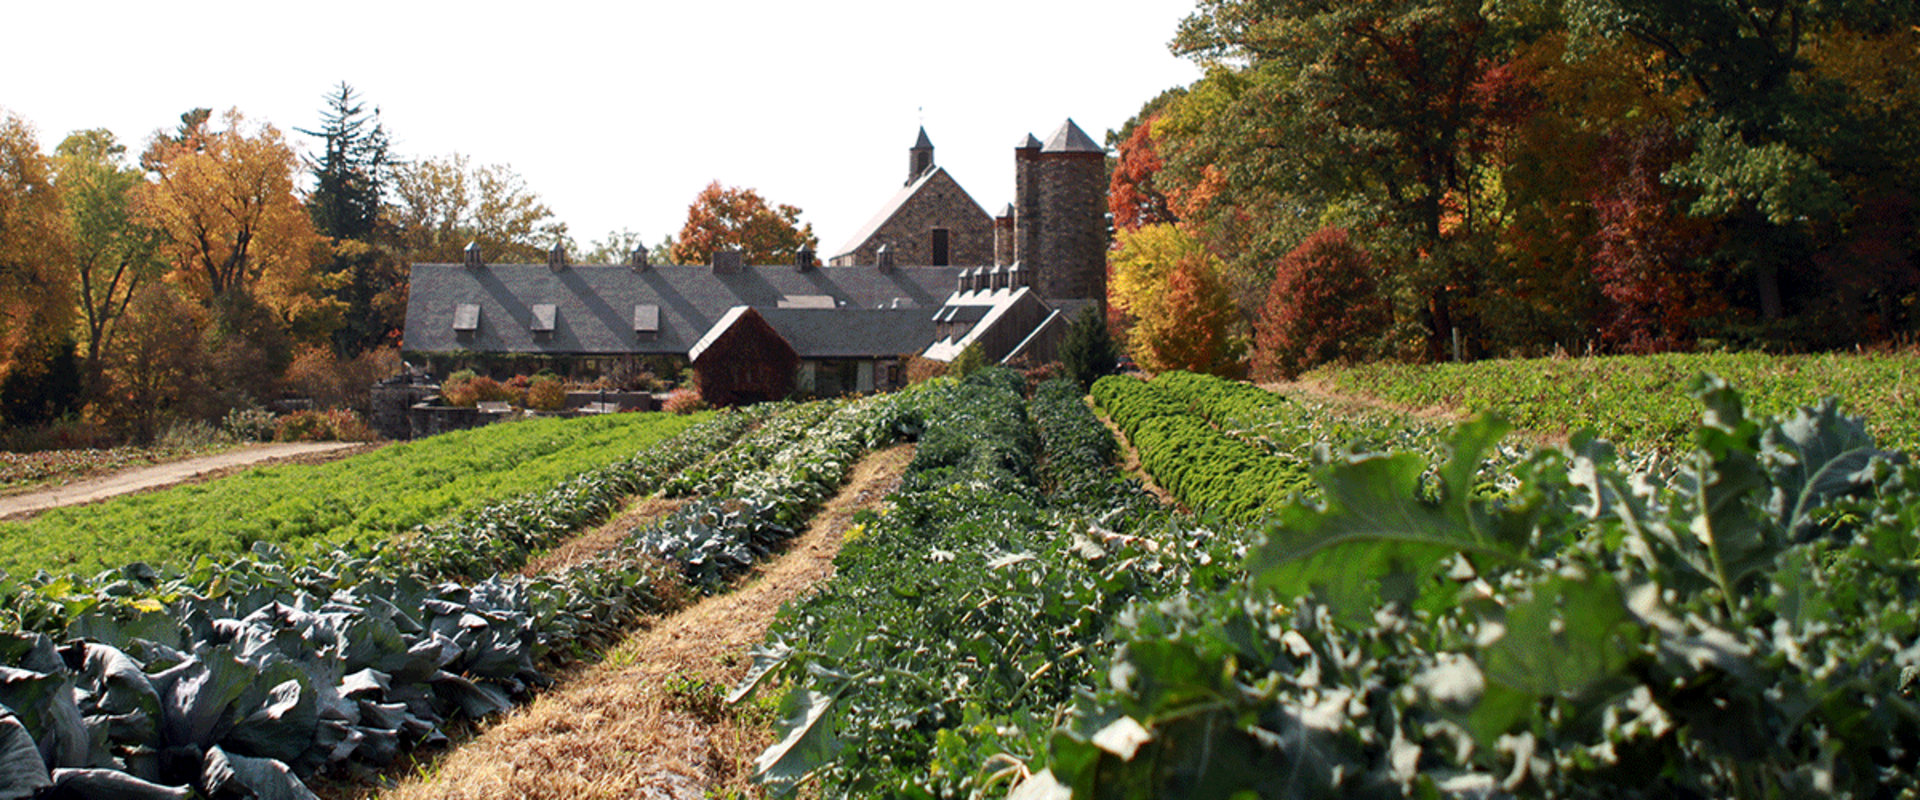 Explore Sustainability With Organic Agricultural Farm Tours & Wellness Near Los Angeles